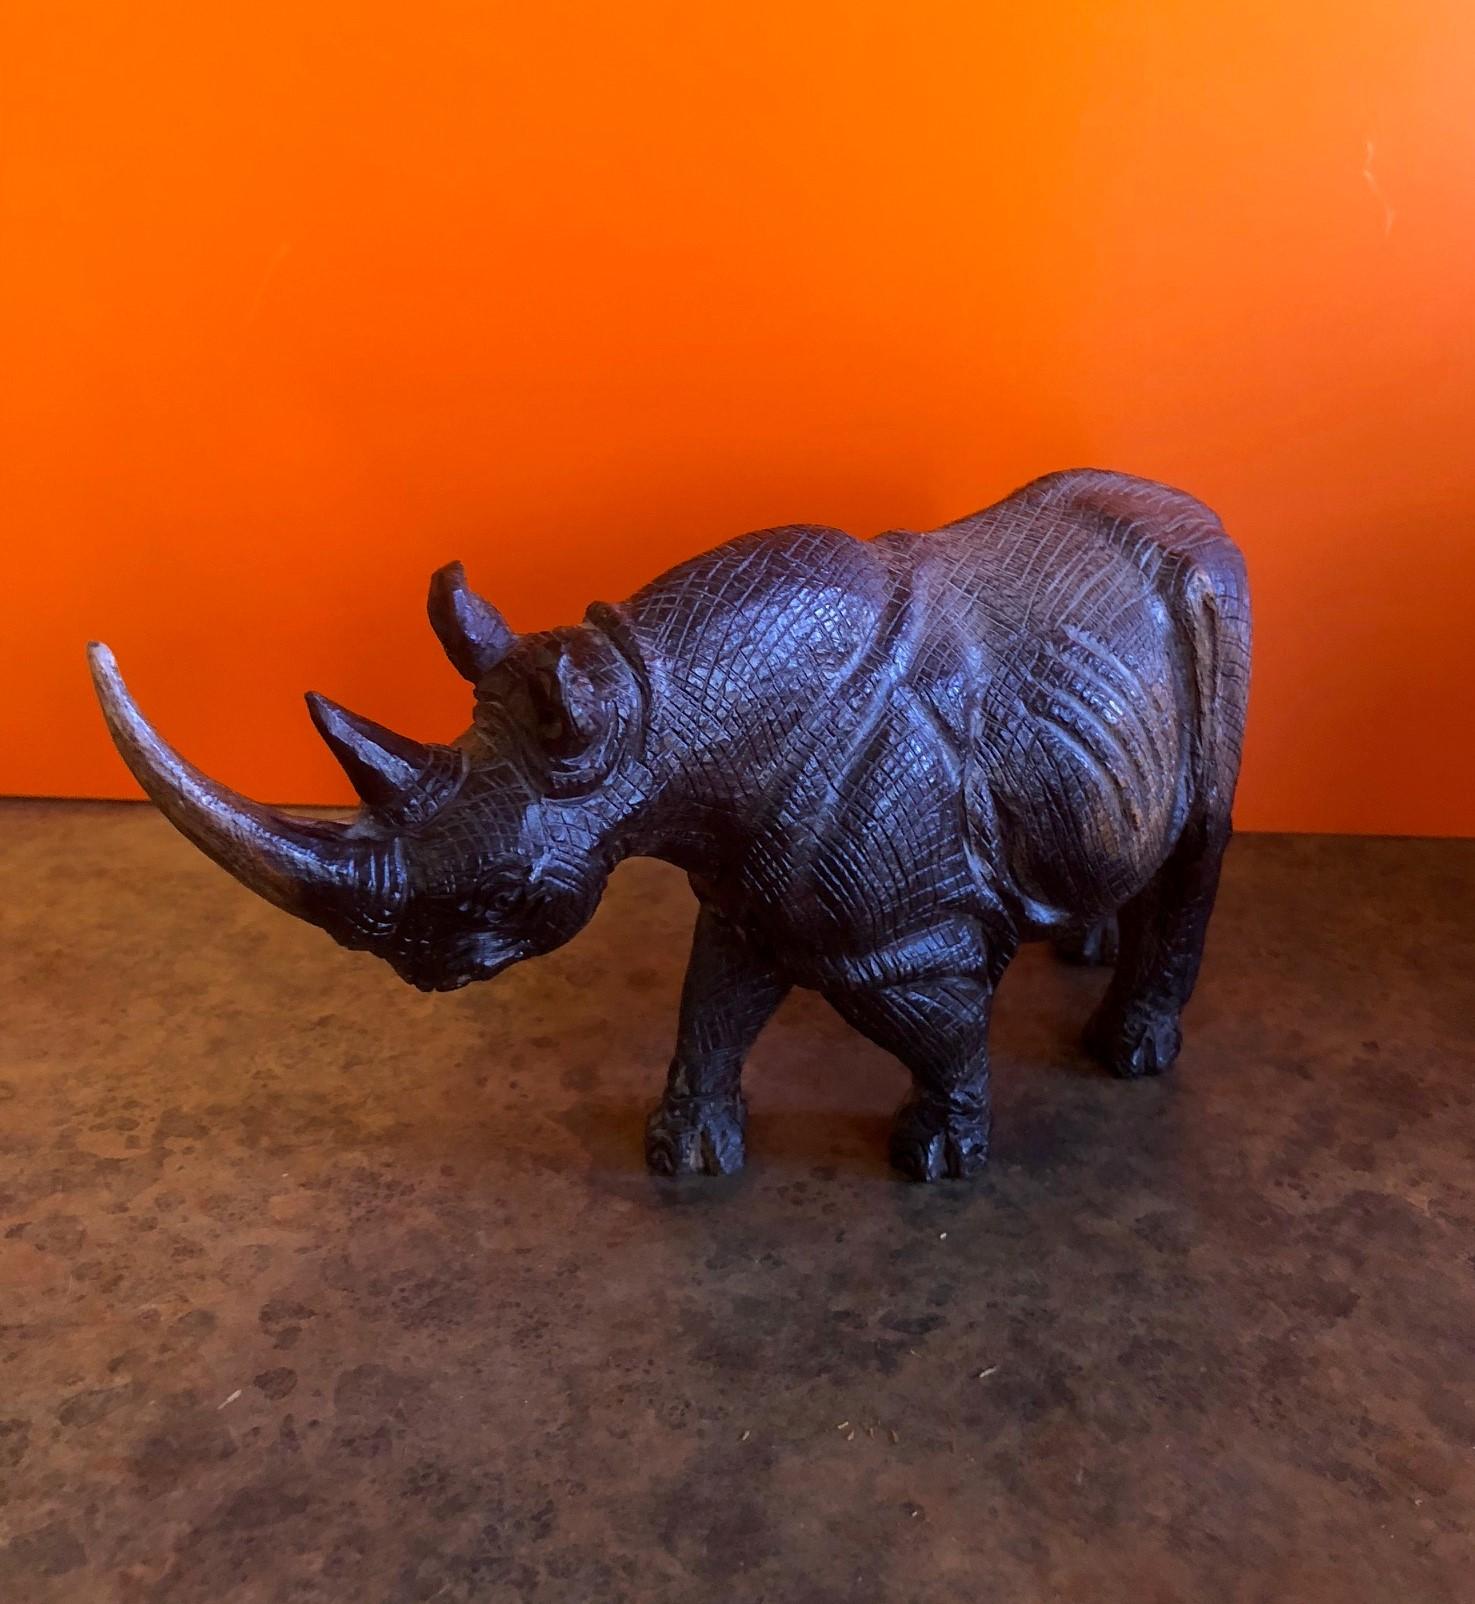 Incredibly detailed hand-carved white rhino sculpture signed by Khoza Frans, circa 1980s. The intricacy of the piece is amazing as the hide looks almost like leather; it appears to be hand carved from an African hardwood.